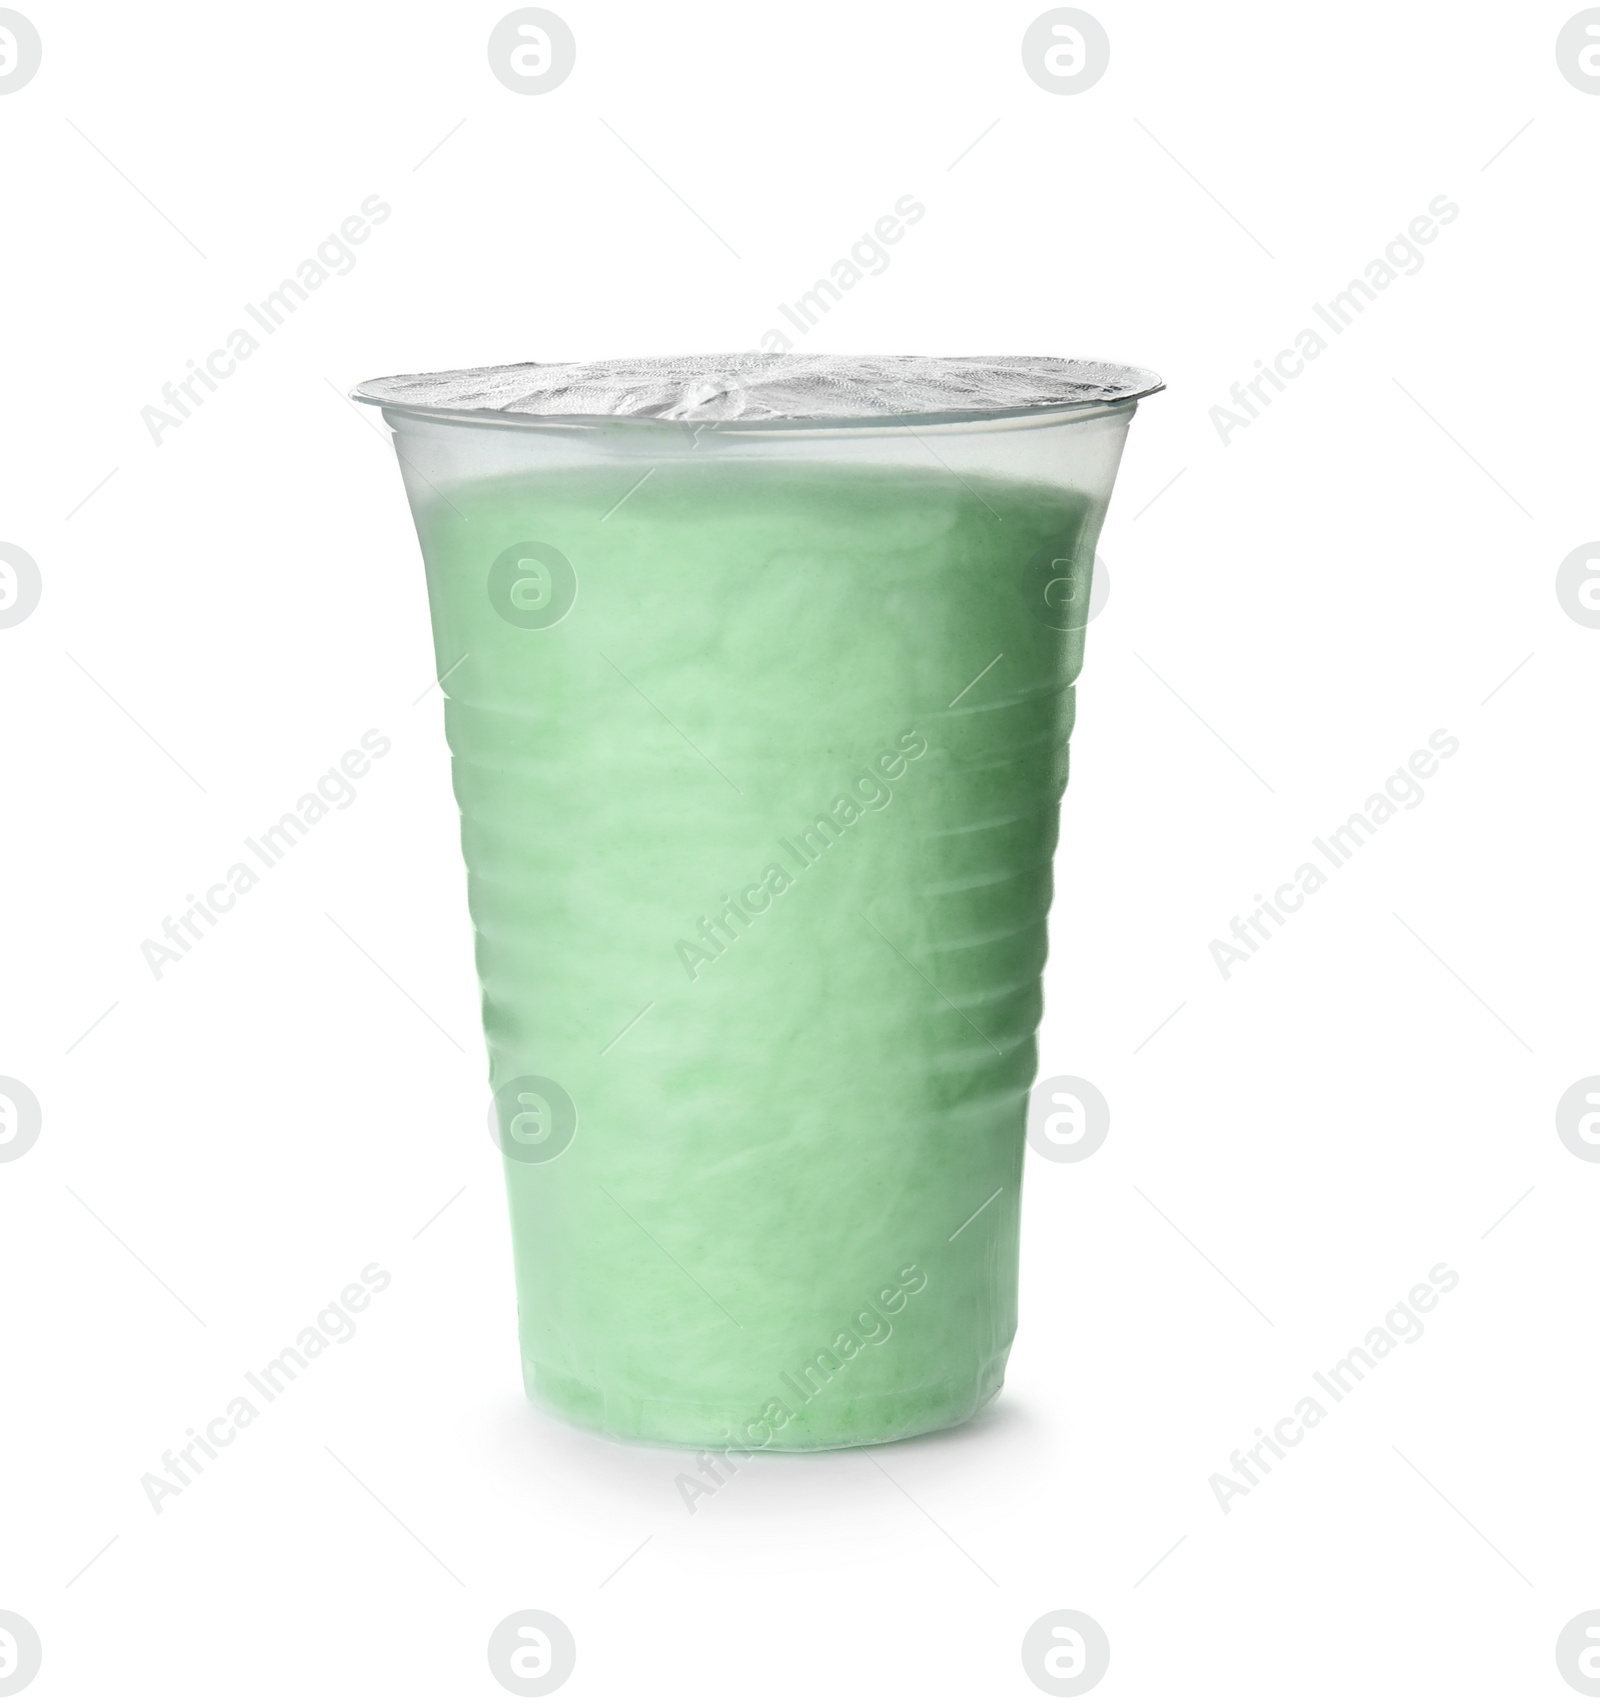 Photo of Yummy cotton candy in plastic cup on white background